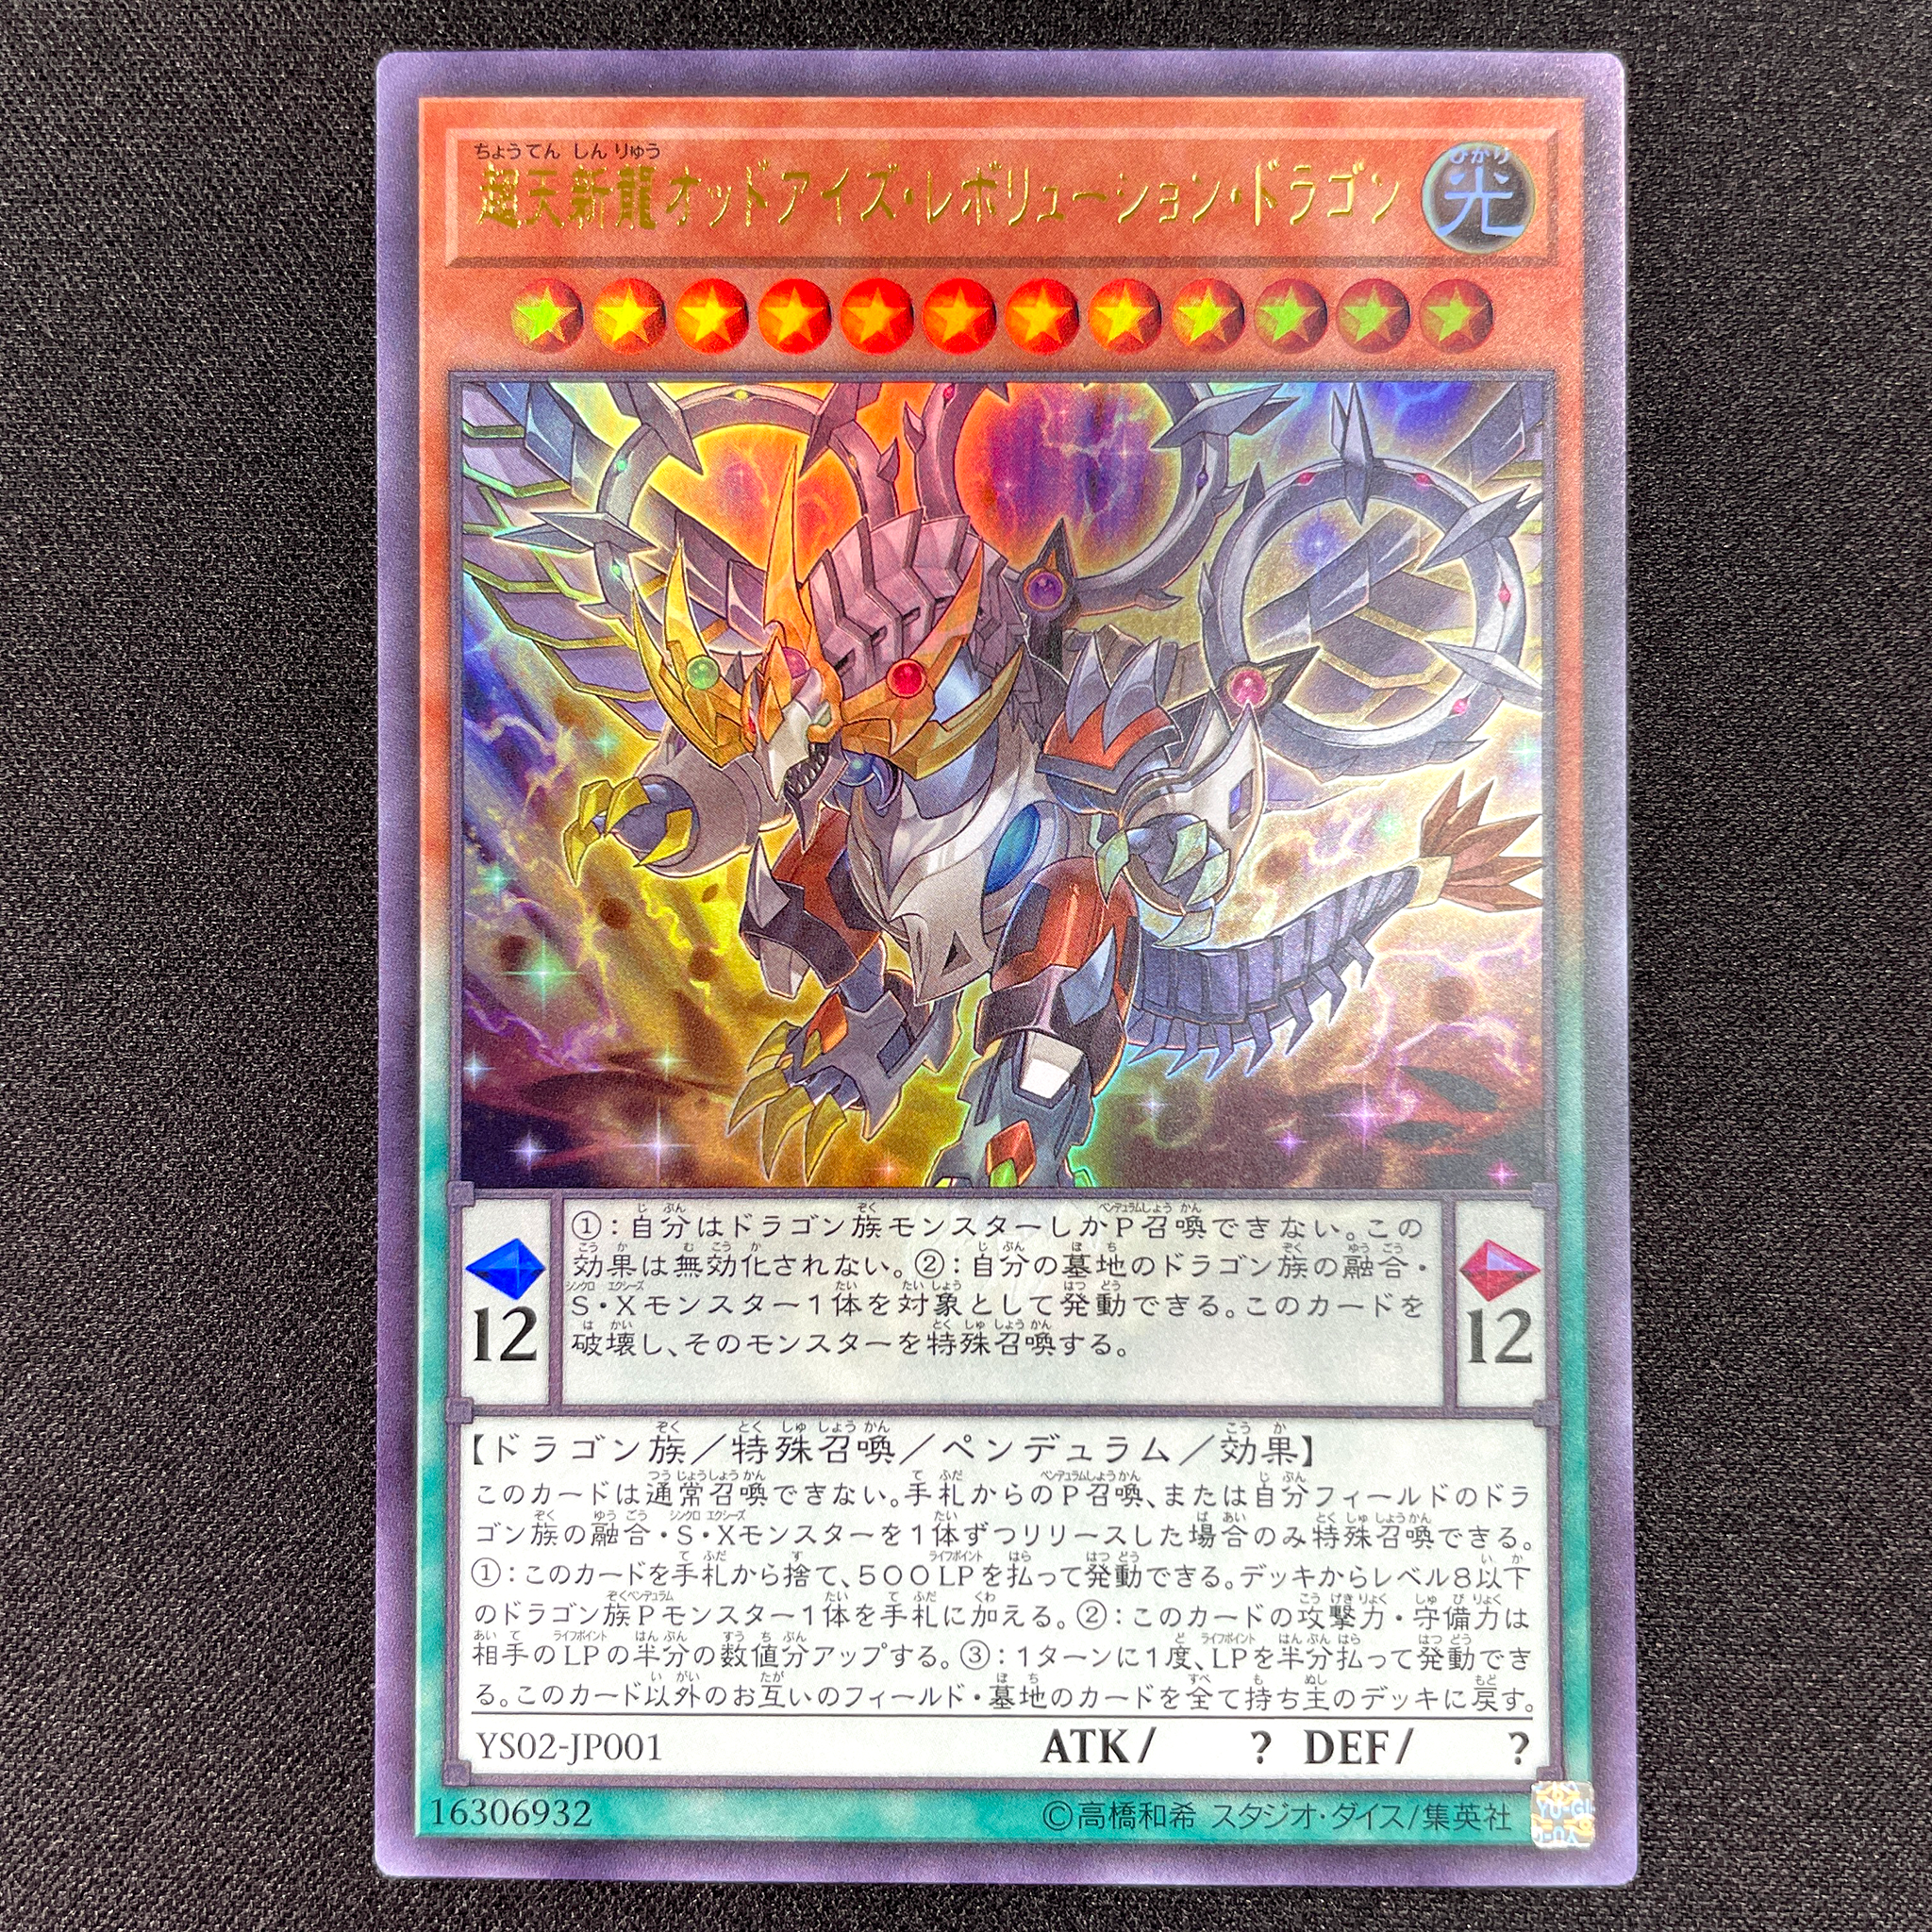 Yu-Gi-Oh! Official Card Game YS02-JP001  Promotional Ultra Rare card  Release date: October 4 2017  Super Tenjin Ryu Odd-Eyes Revolution Dragon